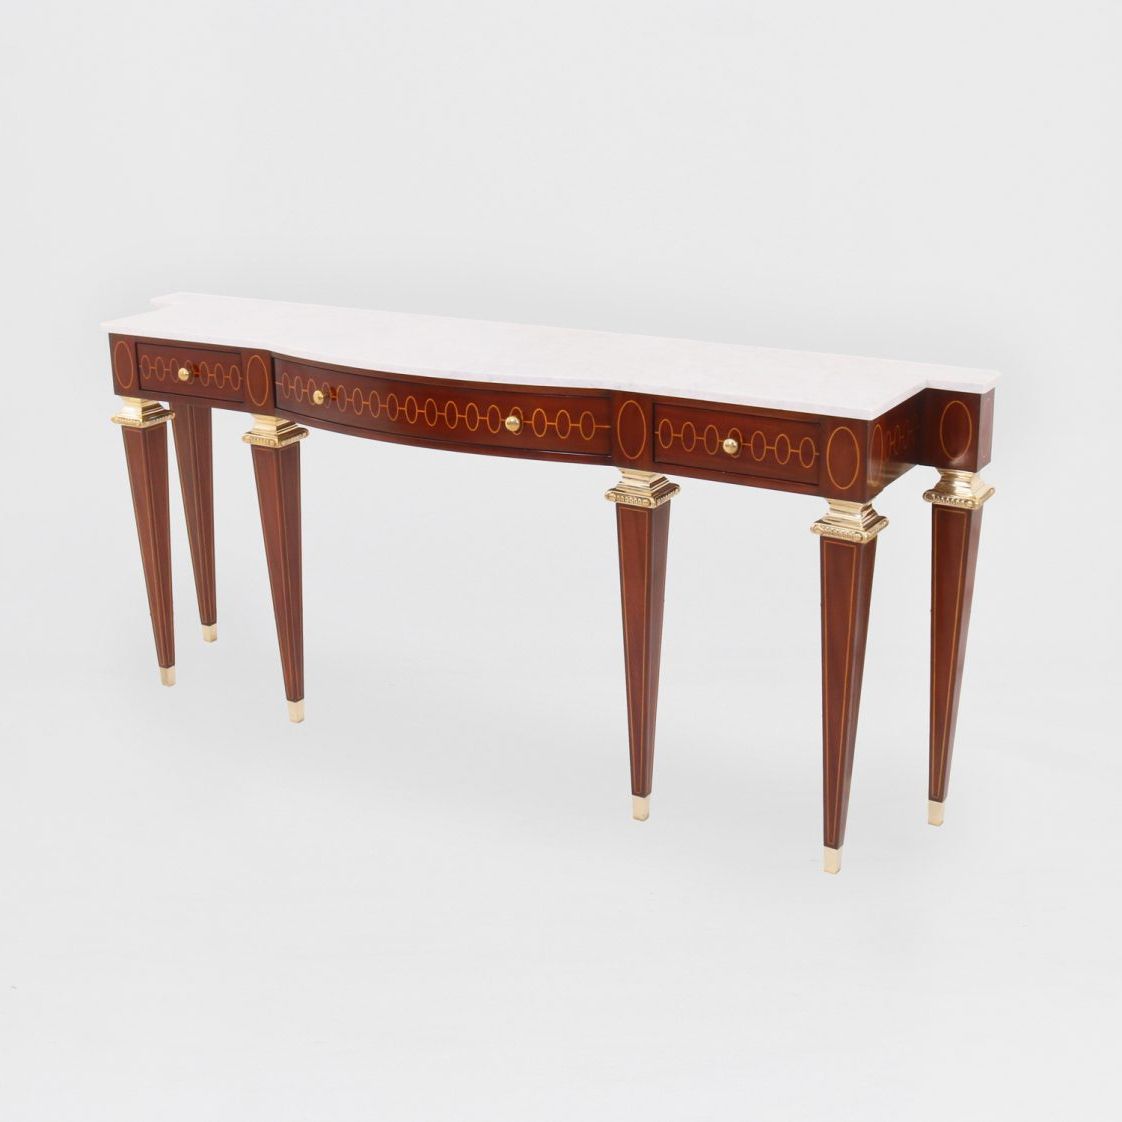 Jansen Furniture Within White Stone Console Tables (View 10 of 10)